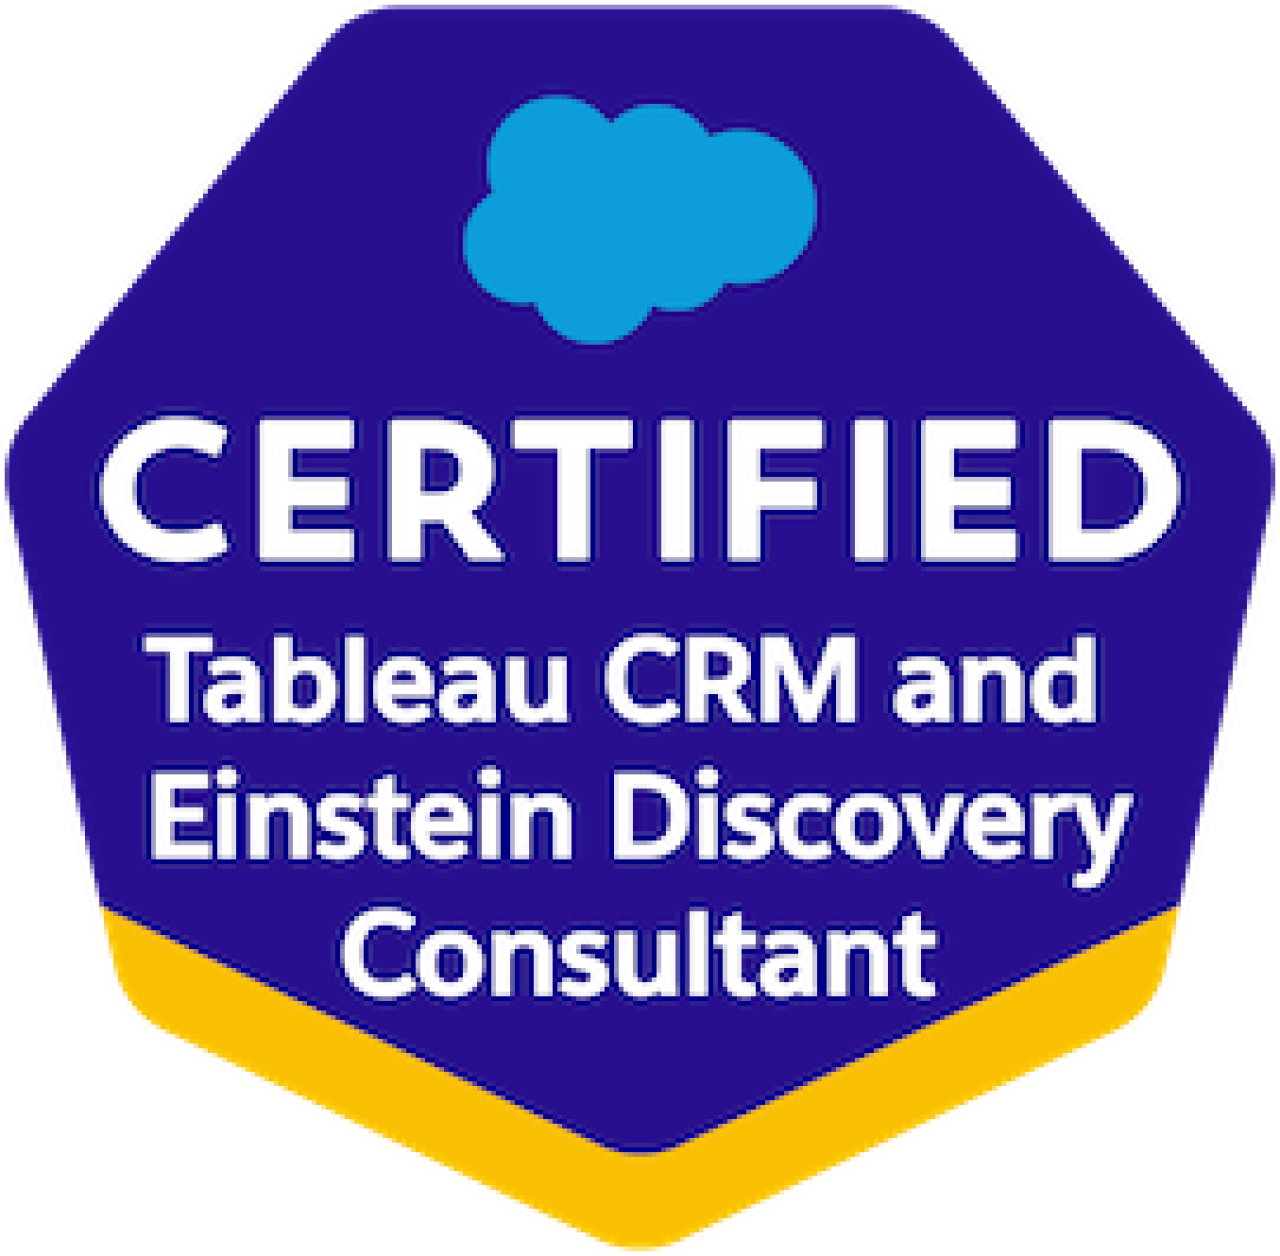 Salesforce Certified Tableau CRM and Einstein Discovery Consultant.